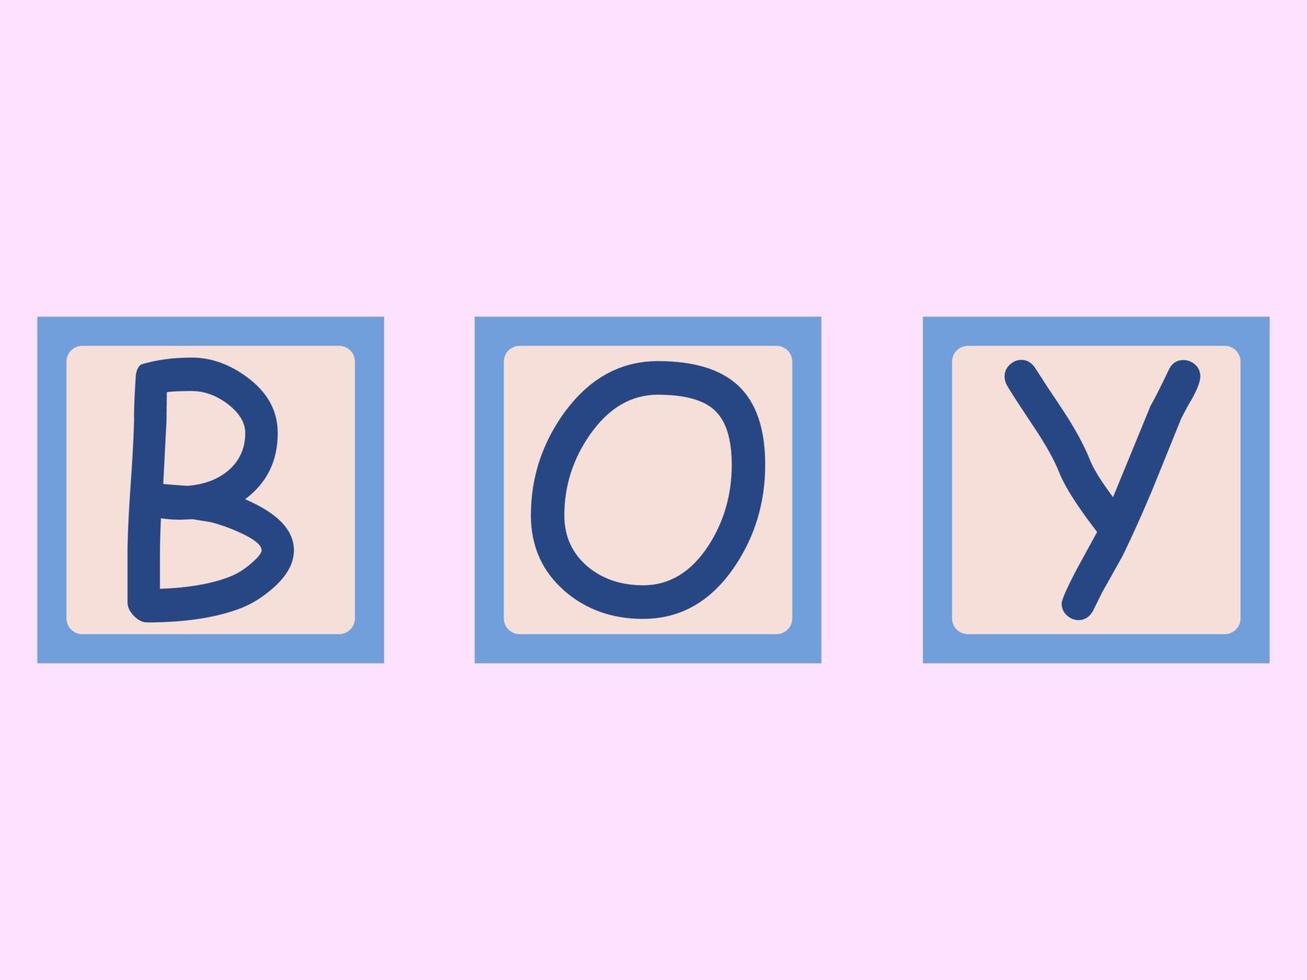 Vector illustration of the letters on the cubes boy